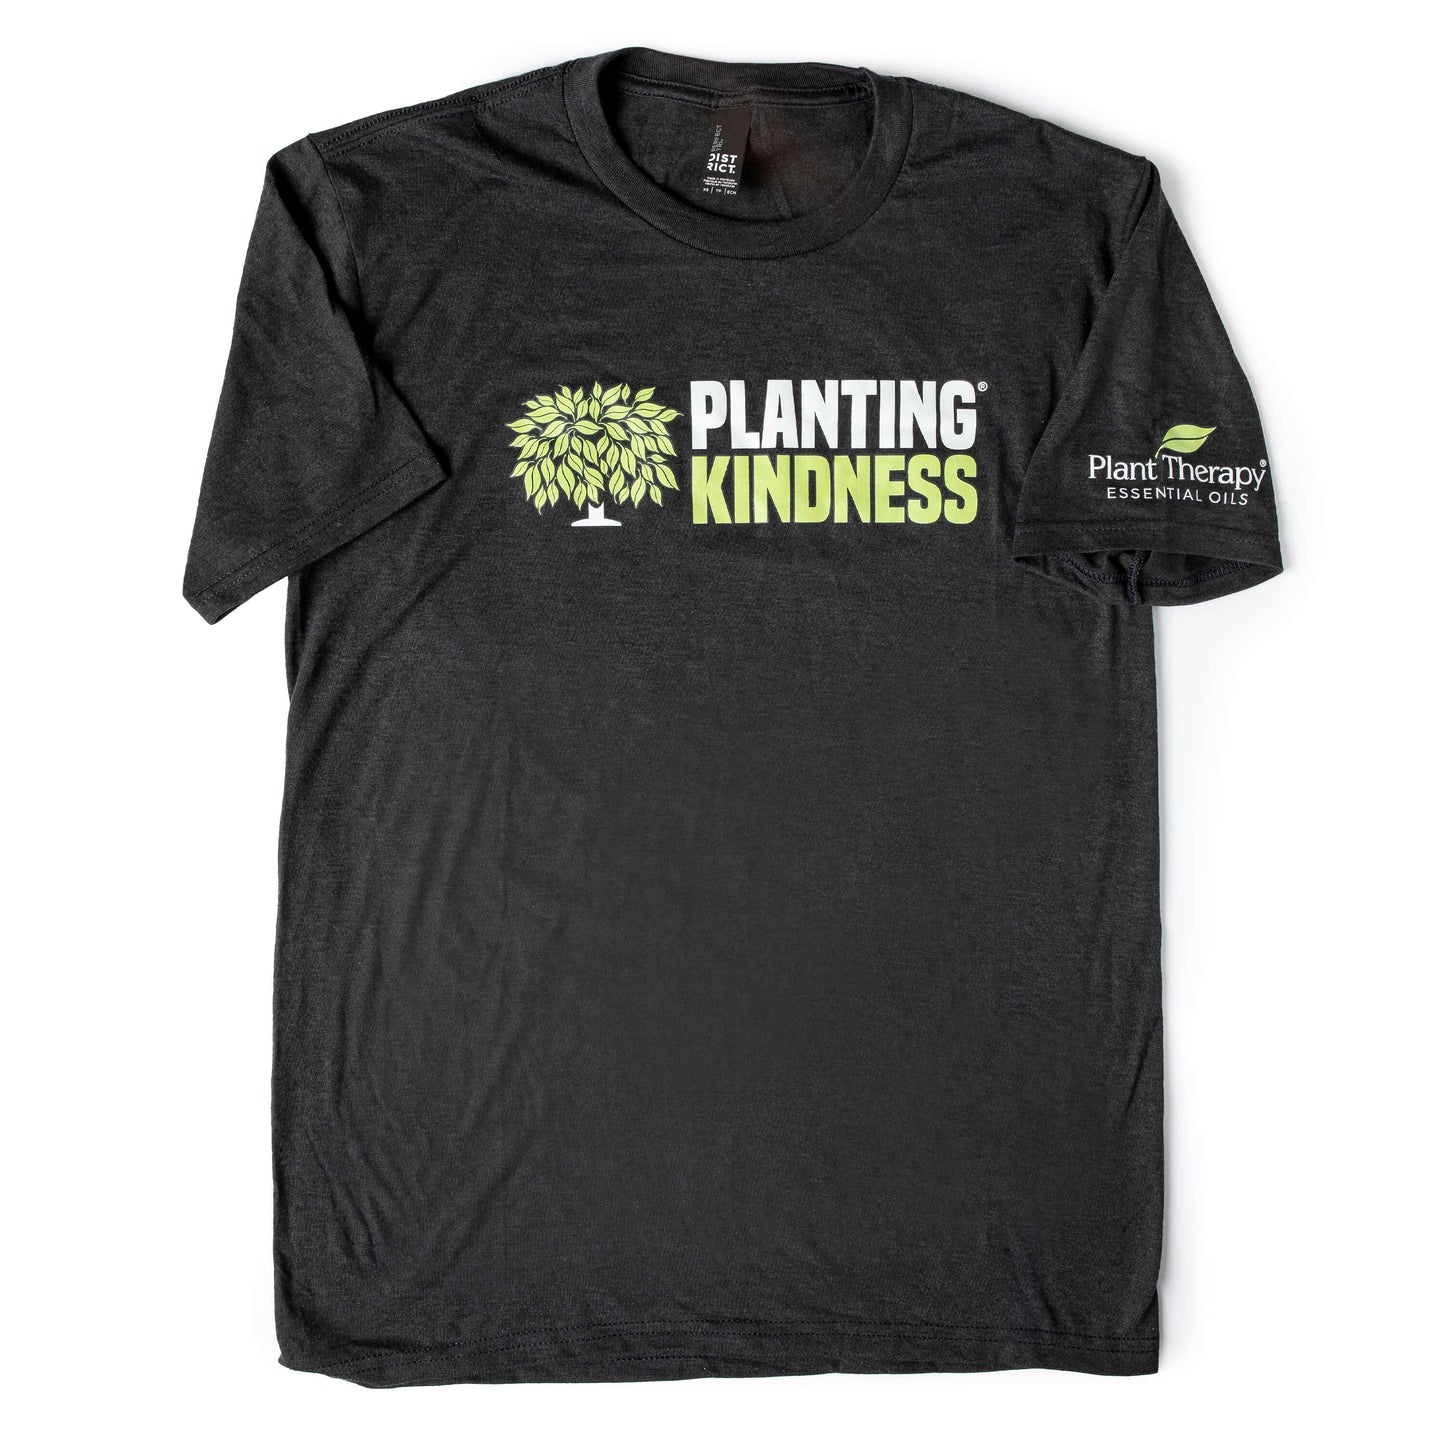 Planting Kindness T-Shirts for Adults Unisex